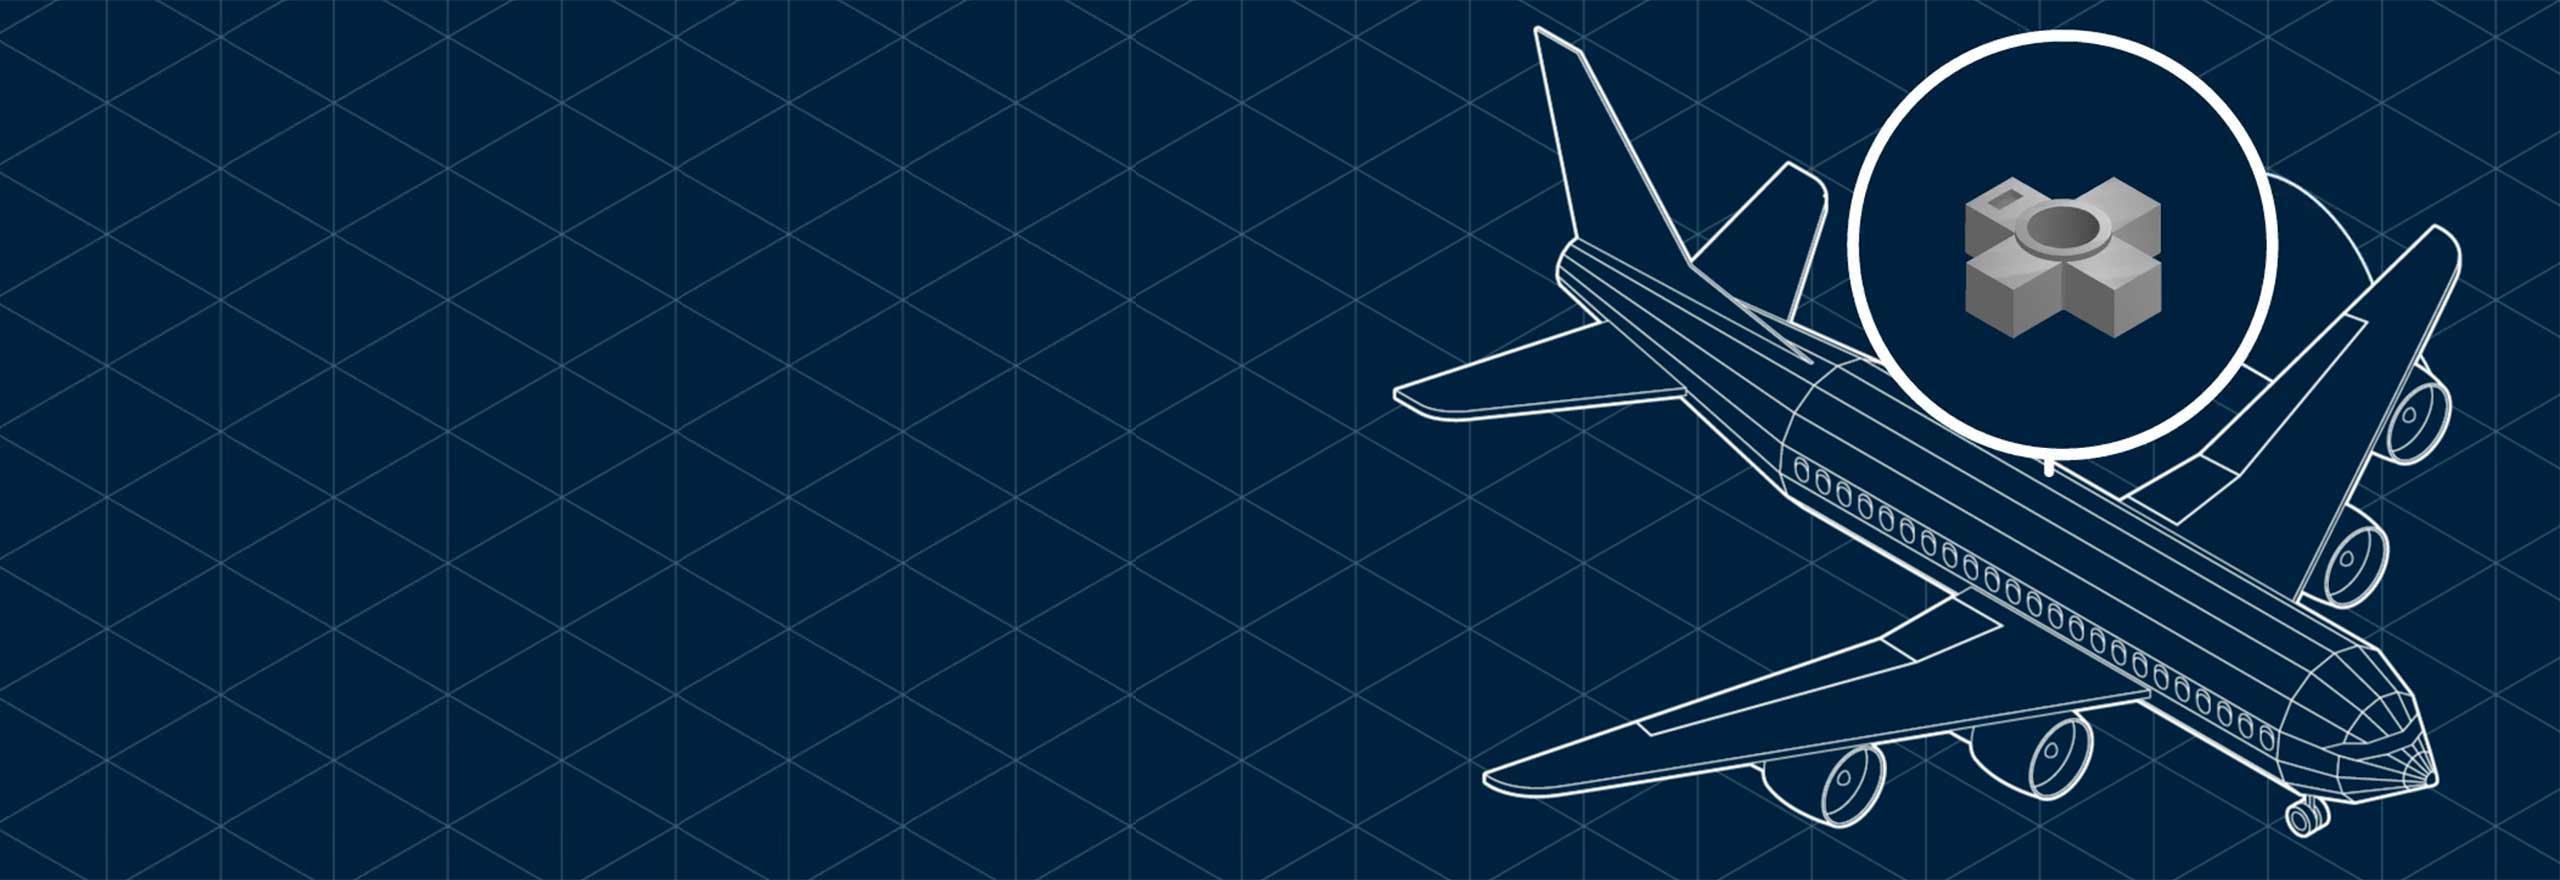 Airplane drawing on blue background of triangles, illustrating reverse engineering of a part in additive manufacturing